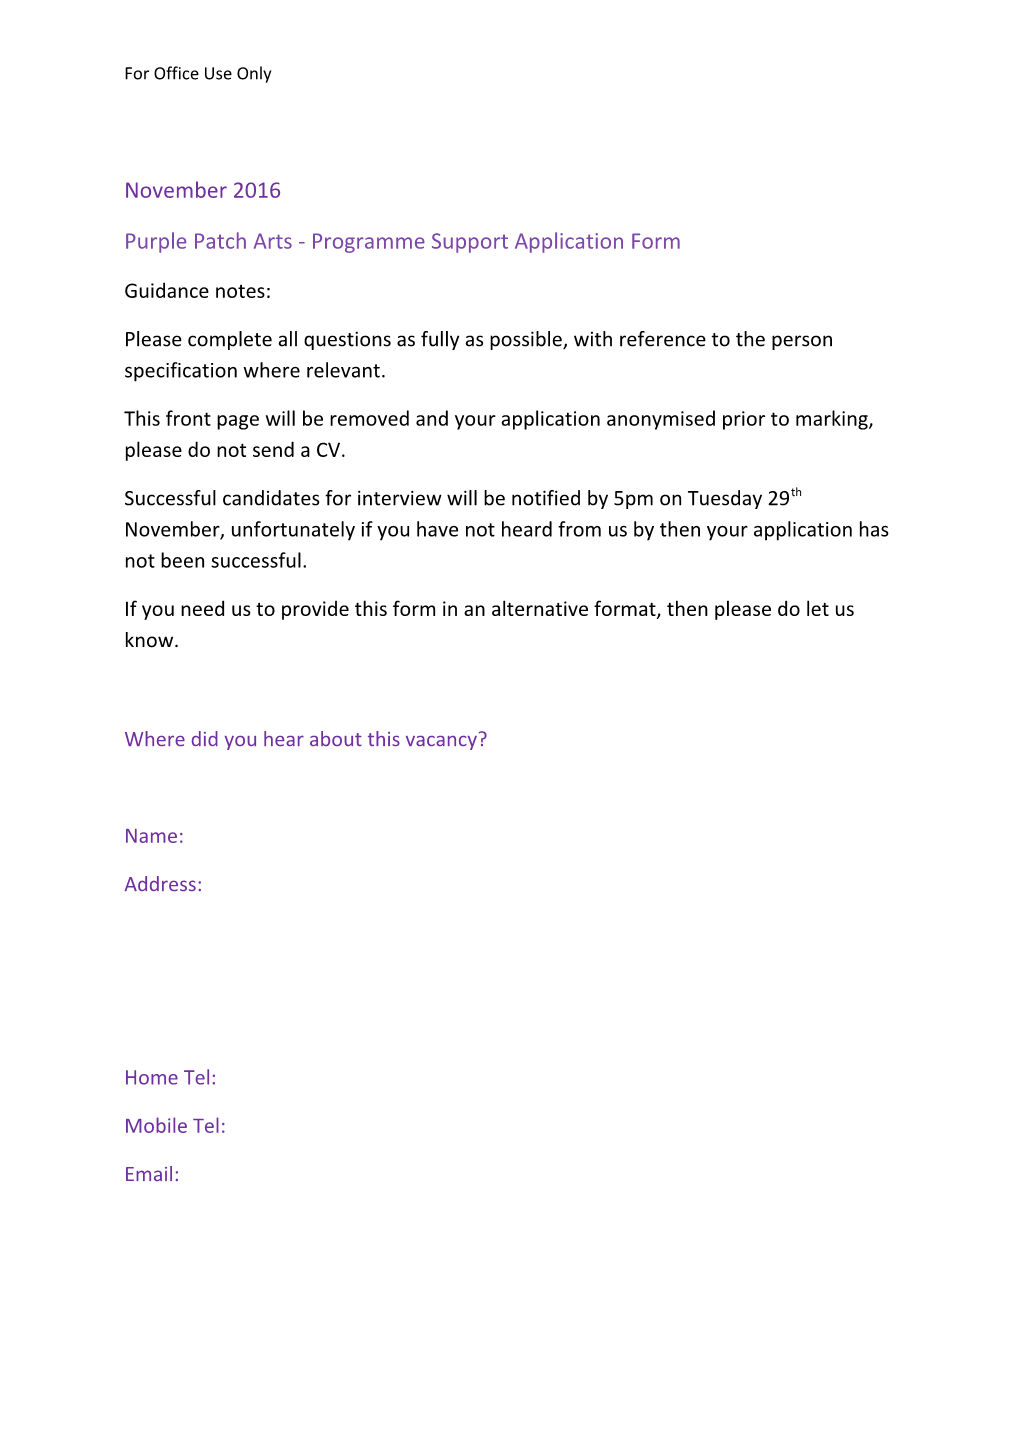 Purple Patch Arts - Programme Support Application Form